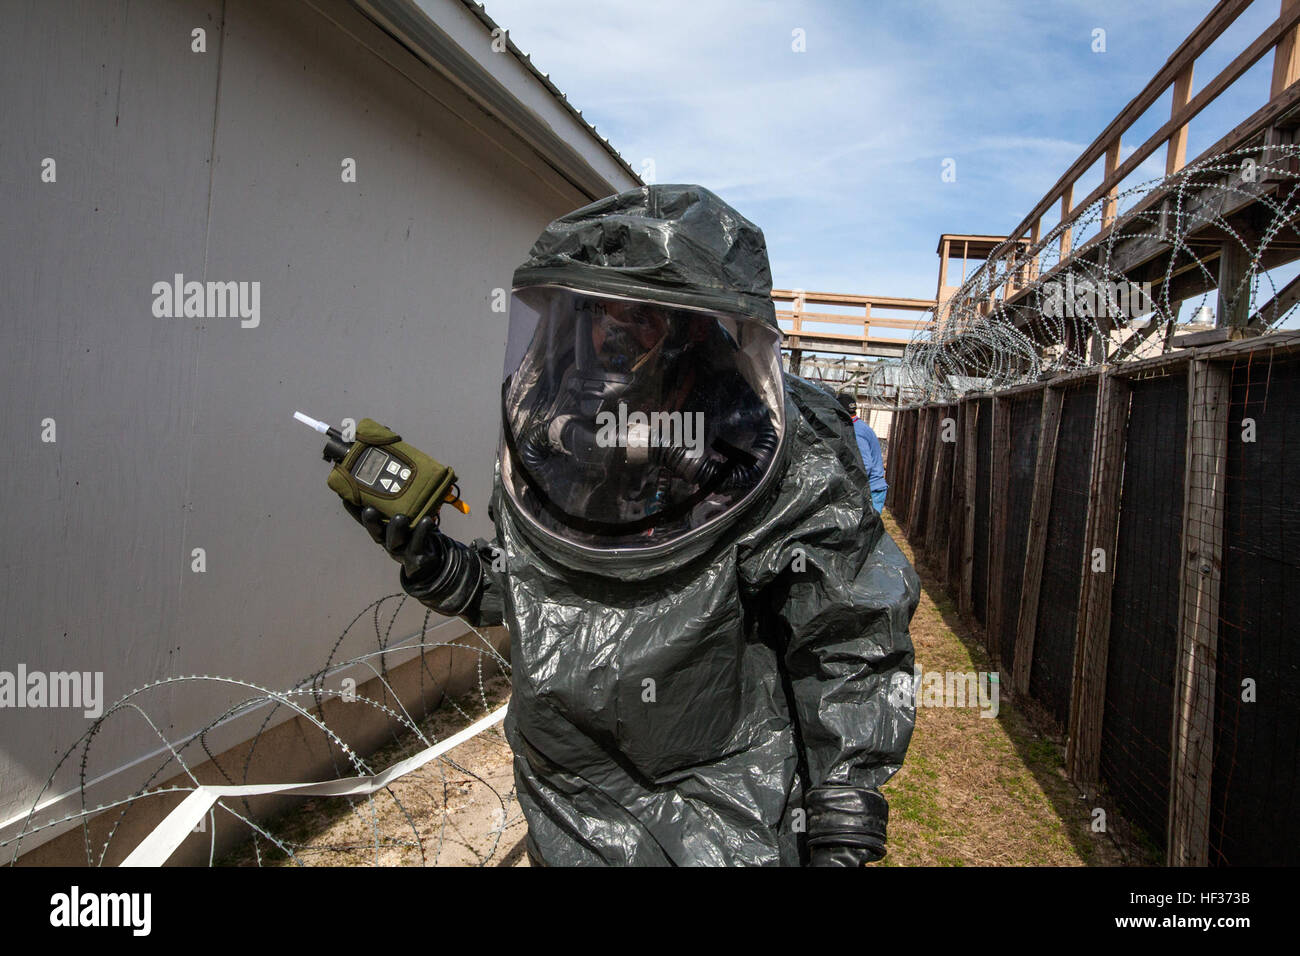 Sgt. Nick Lam, 21st Weapons of Mass Destruction Civil Support Team (WMD CST), New Jersey National Guard, monitors air for chemical contamination during a full-scale Homeland Response Force exercise involving units from the New Jersey and New York Army and Air National Guard at Joint Base McGuire-Dix-Lakehurst, N.J., April 16, 2015. The Chemical, Biological, Radiological and Nuclear (CBRN) portion of the exercise was performed by National Guard Soldiers and Airmen from New Jersey’s 21st Weapons of Mass Destruction Civil Support Team and New York’s 2nd Weapons of Mass Destruction Civil Support T Stock Photo